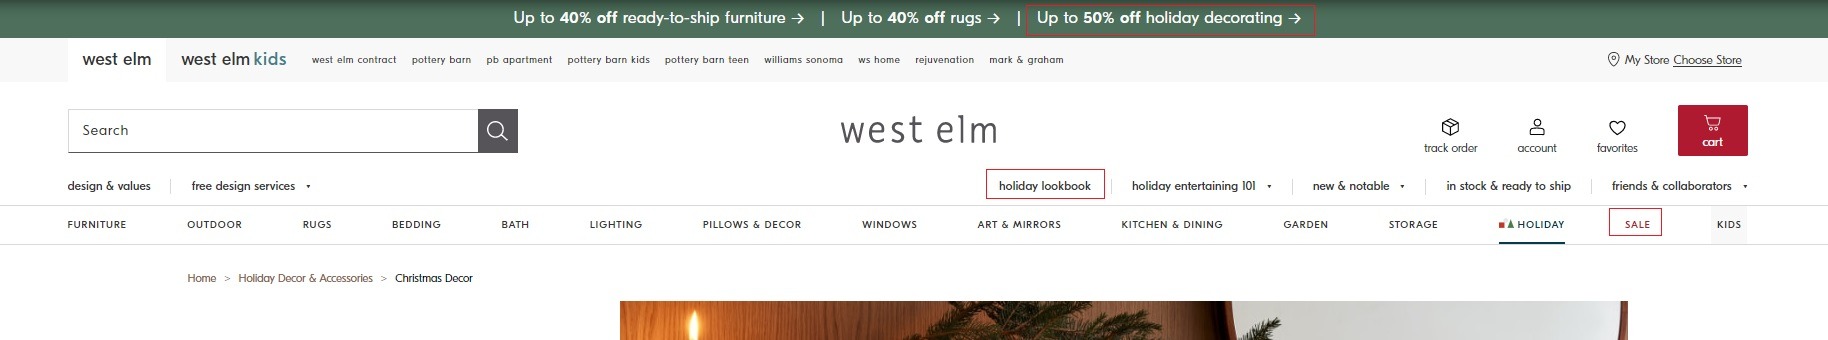 west elm onsite holiday promotion examples